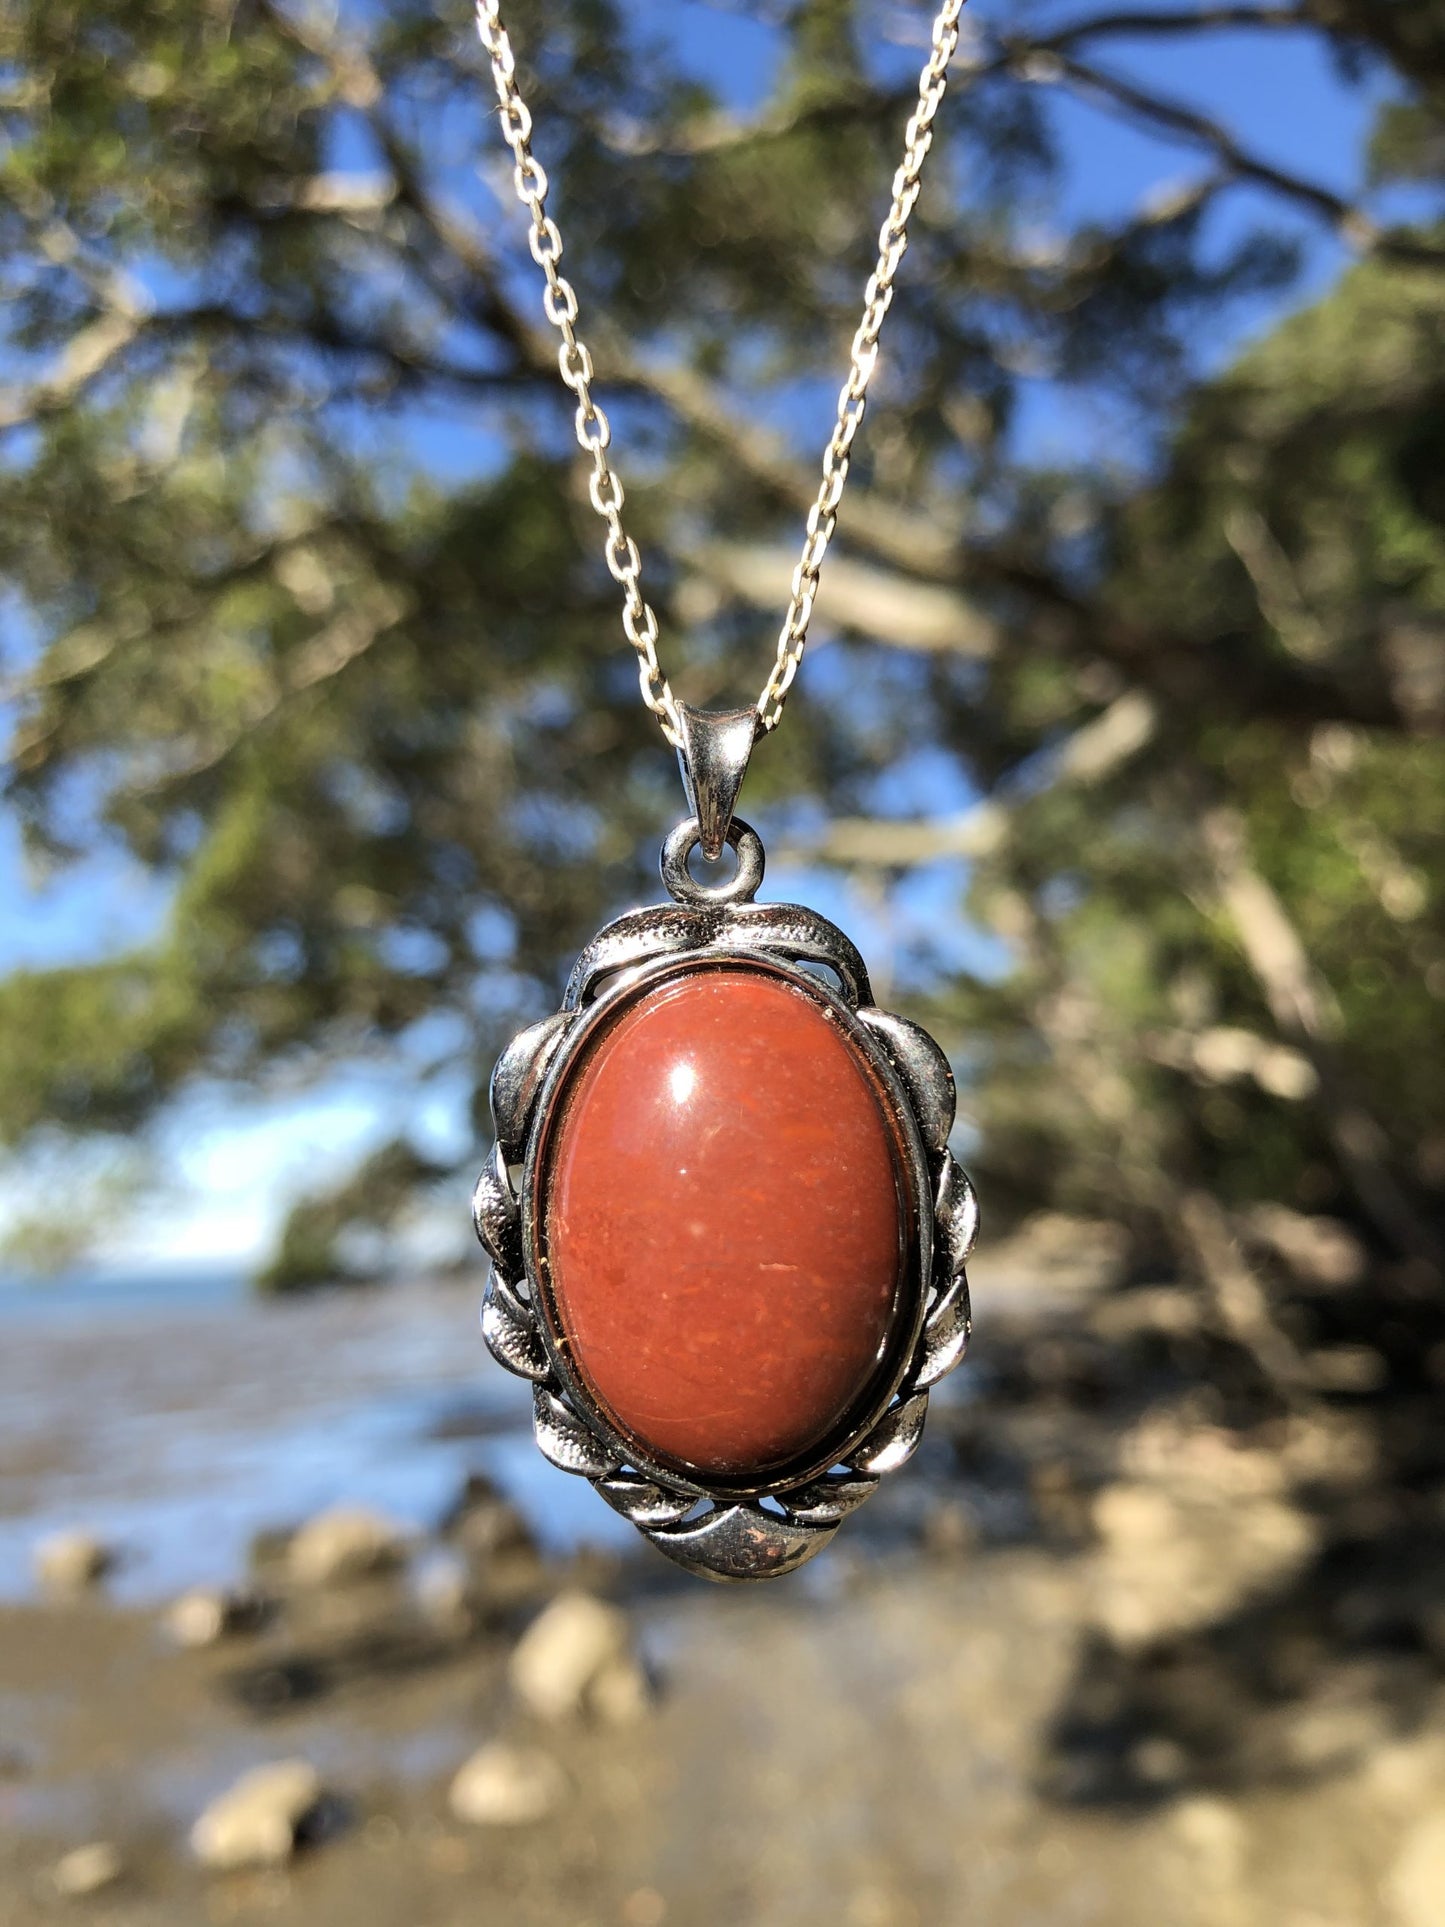 Necklace with New Zealand red Jasper, rich, deep red with tiny flecks of colour variation, hand polished to a 25x18mm cabochon and set in a silver plated setting with 19 inch chain, held up in front of tree on beach